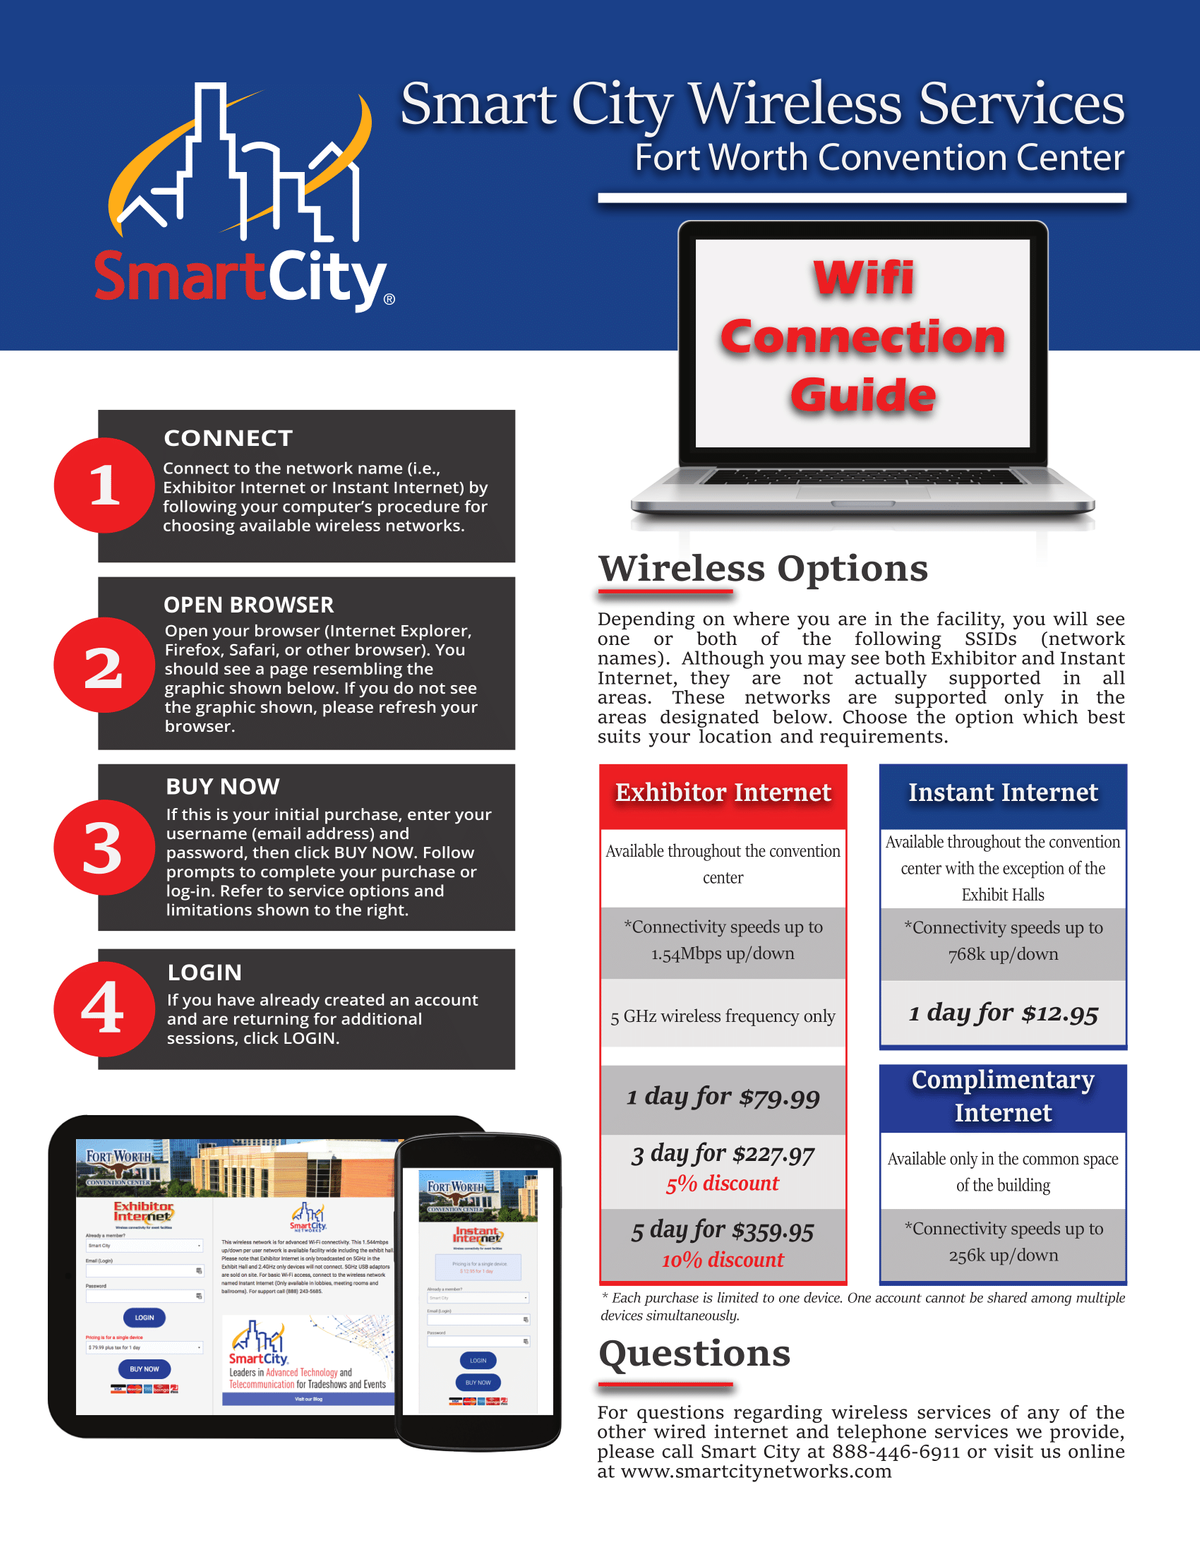 (007) Smart City Fort Worth Wireless flyer NEW-1.png